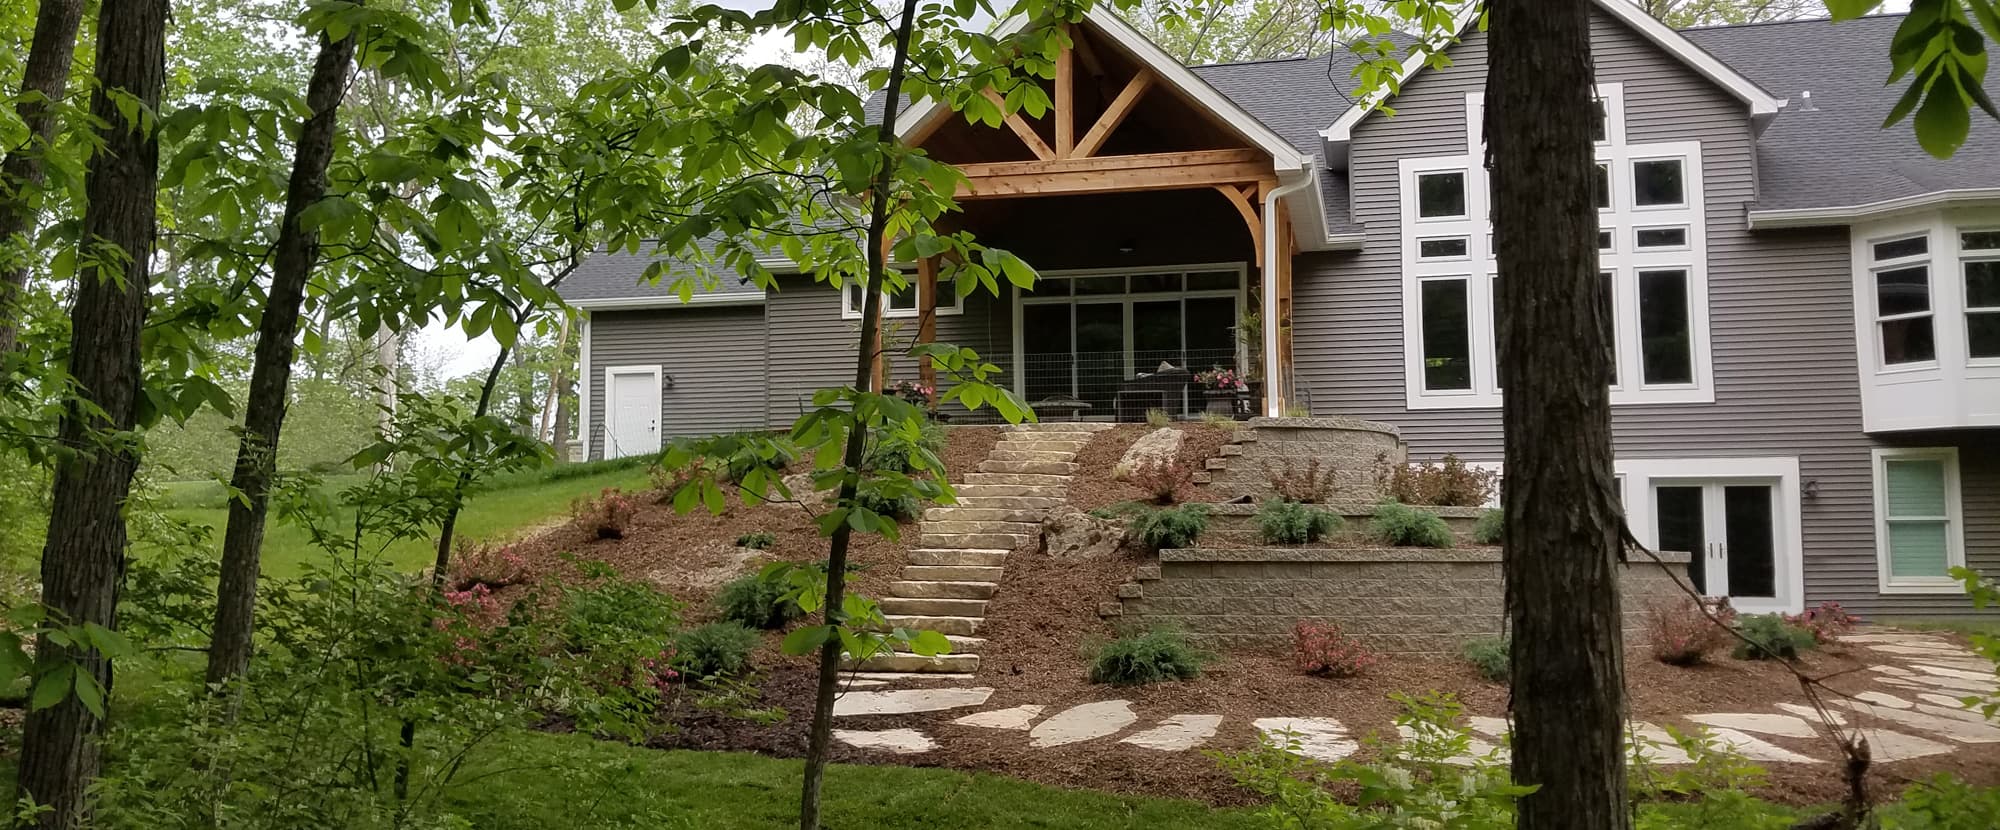 St Louis Landscaping Company Malone, St Louis Landscaping Companies